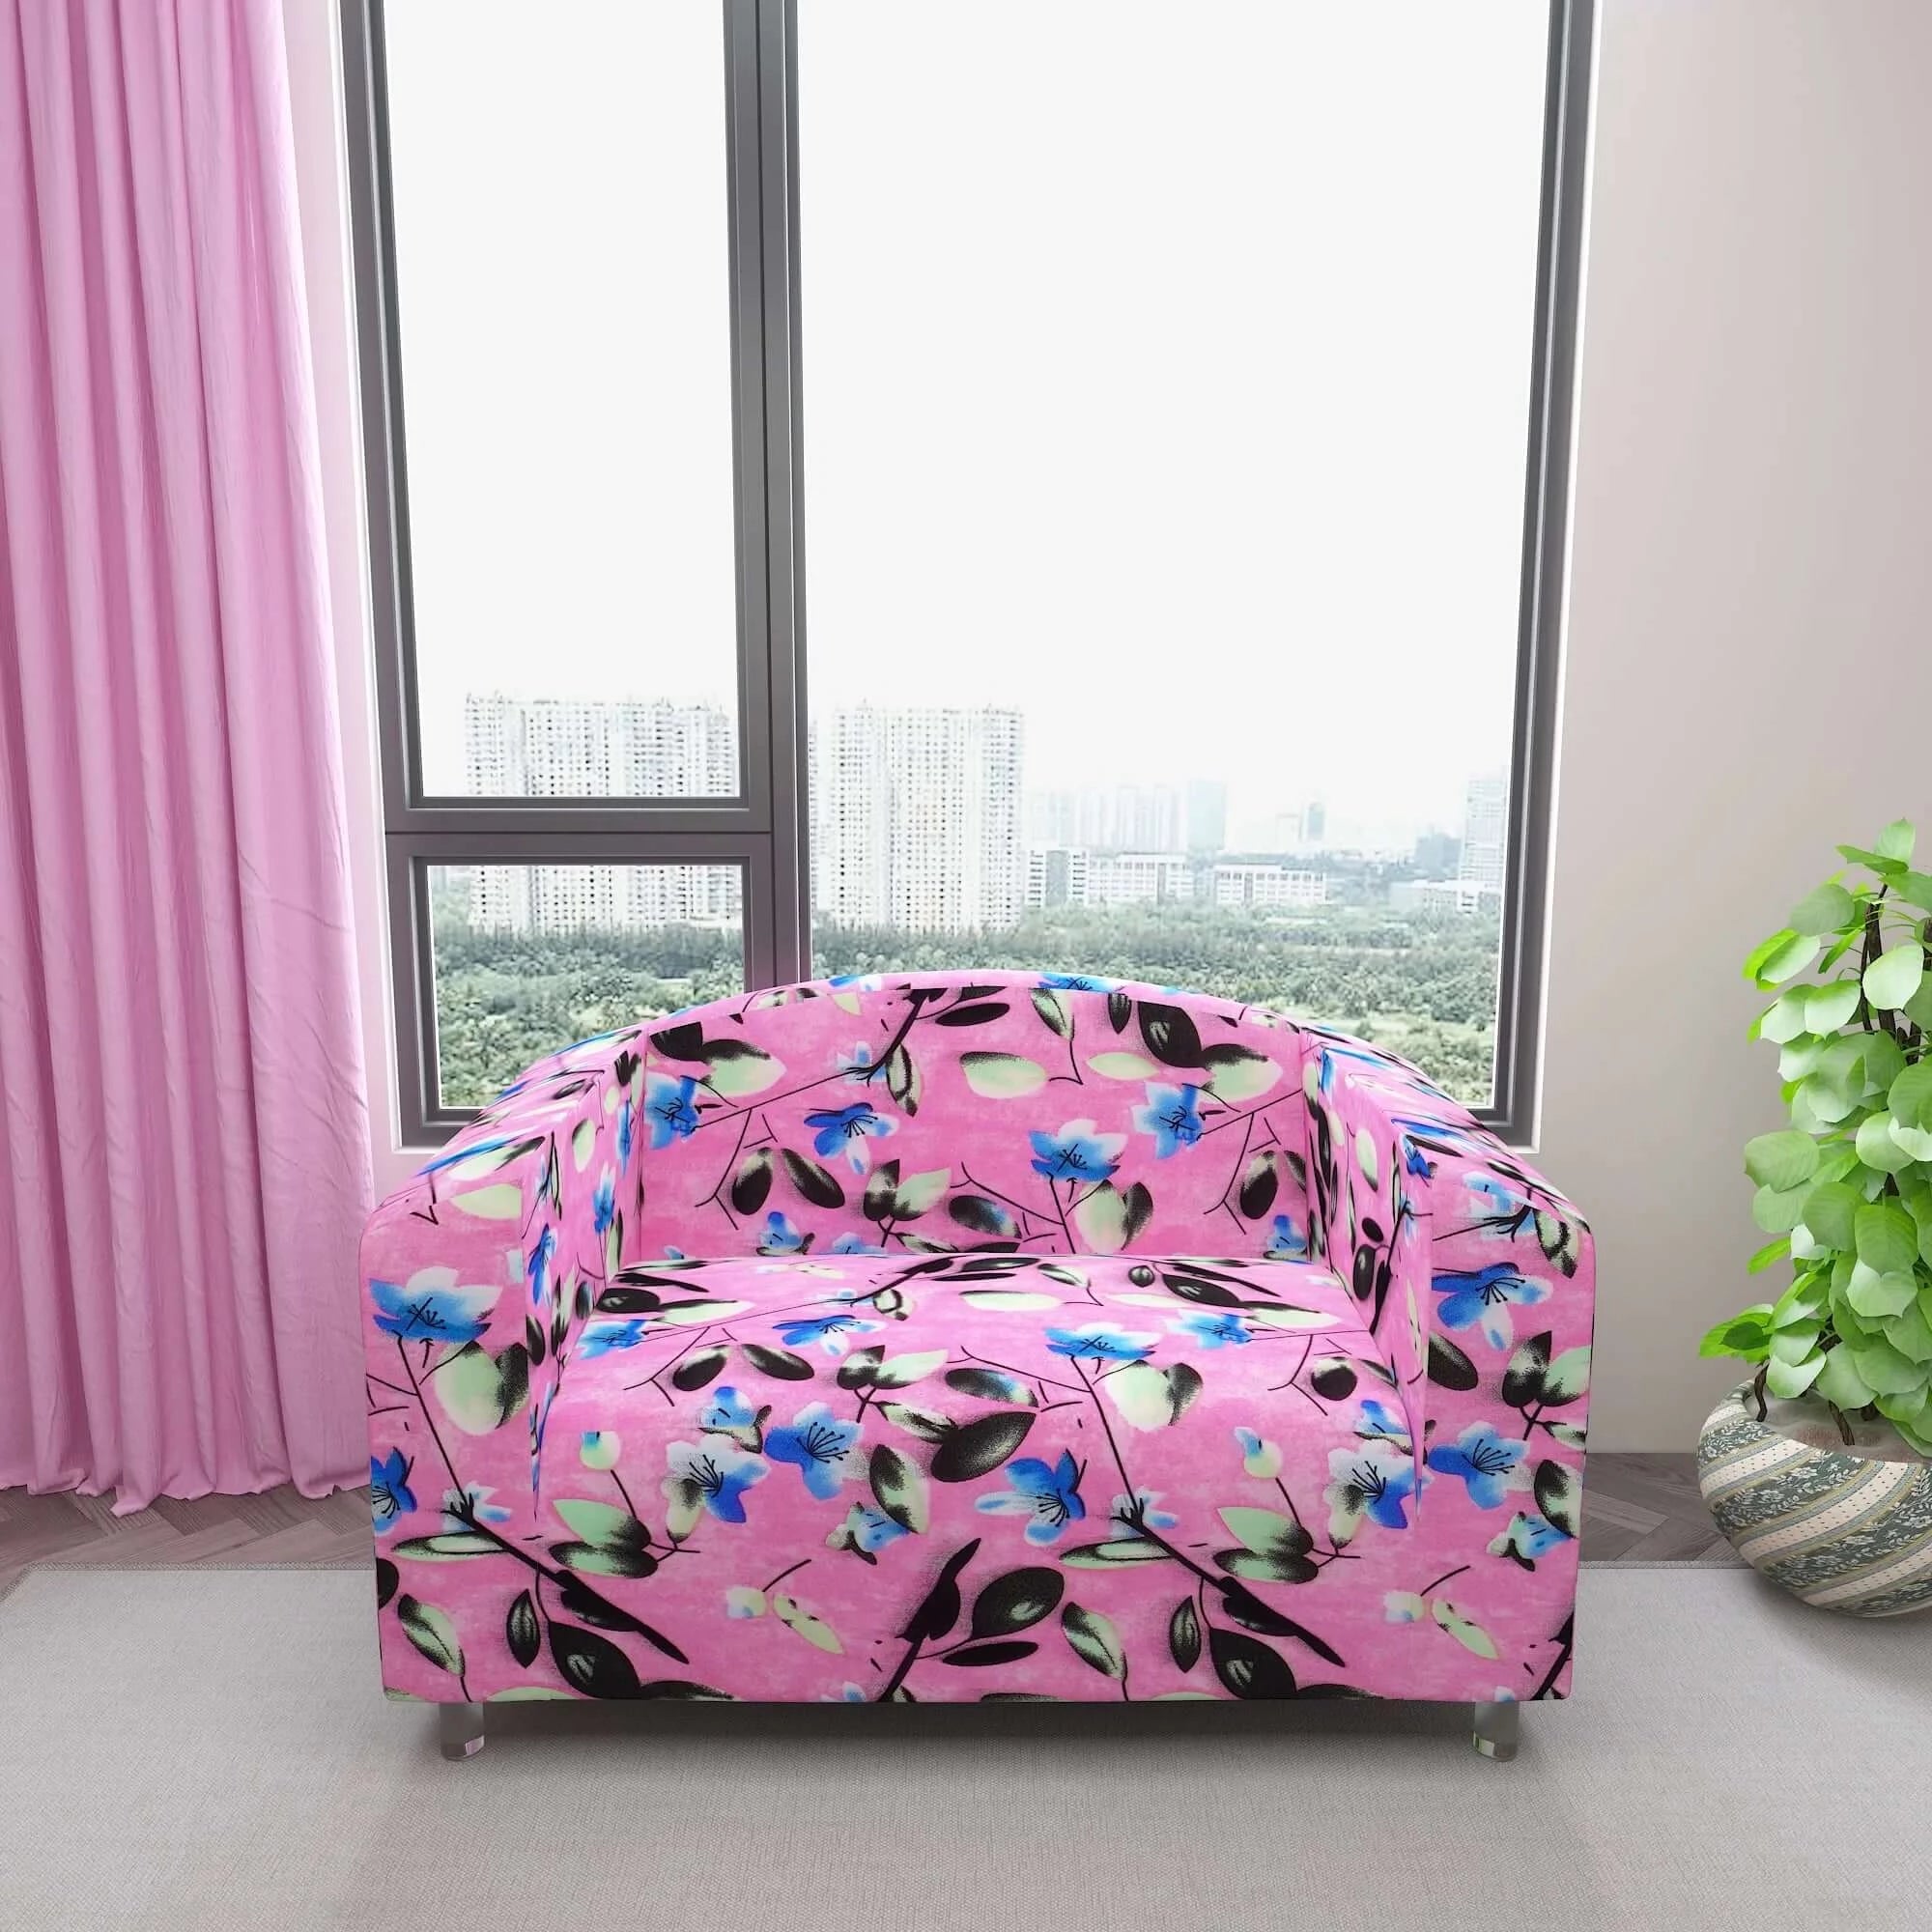 Marigold Printed Sofa Protector Cover Full Stretchable, MG12 - Dream Care Furnishings Private Limited